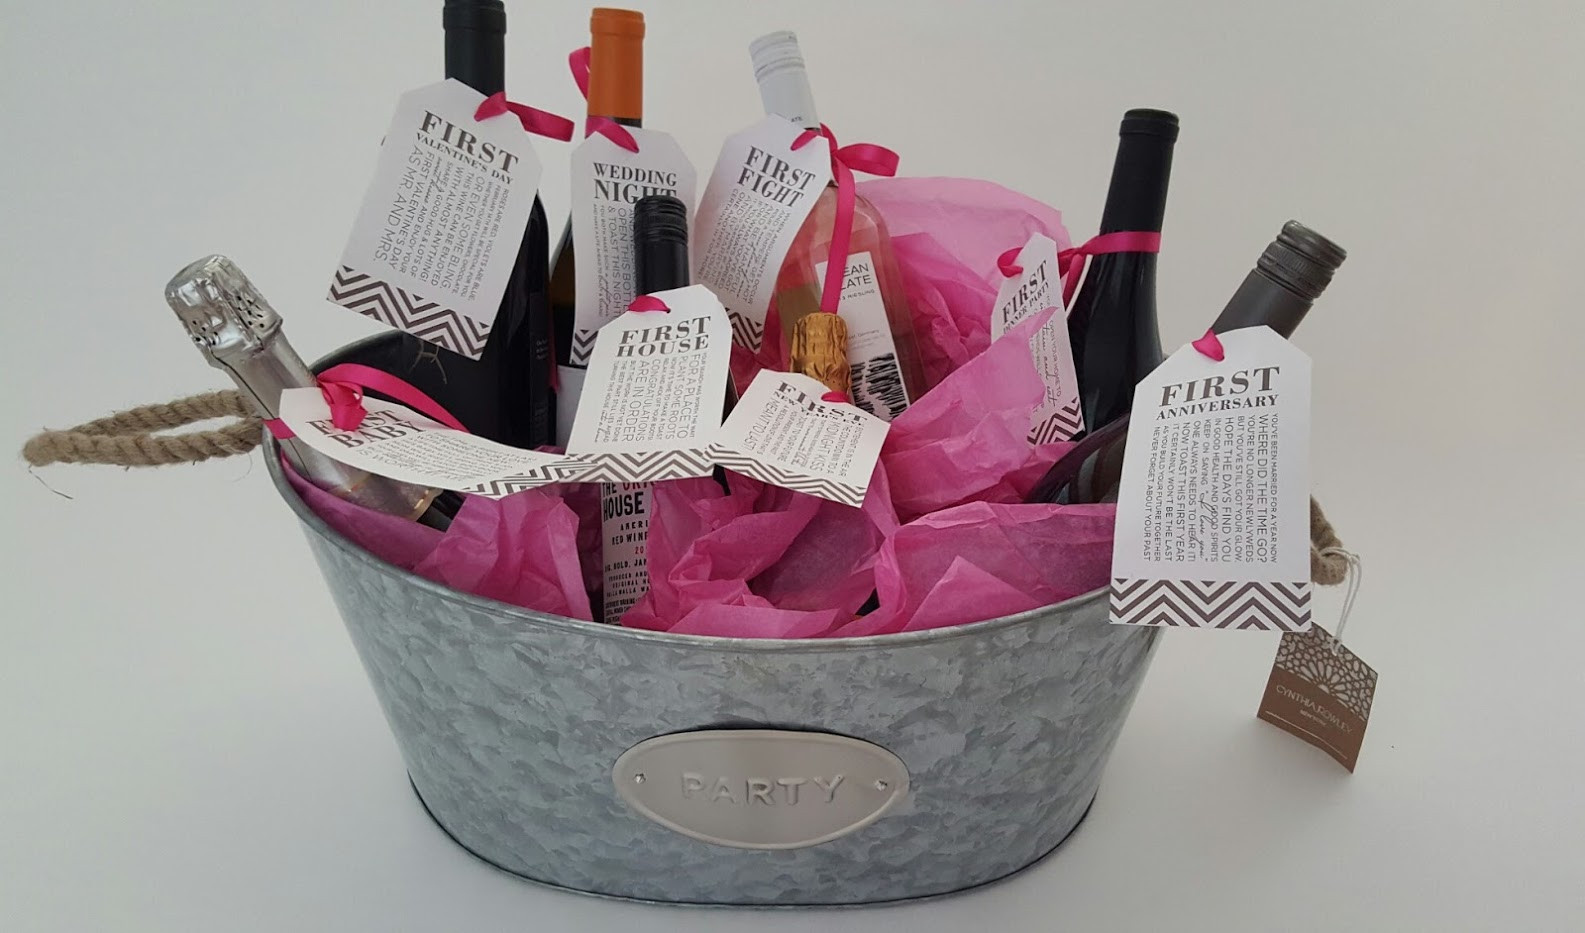 Bridal Shower Gift Basket Ideas For Guests
 Bachelorette Party Gift Baskets Gift Ftempo